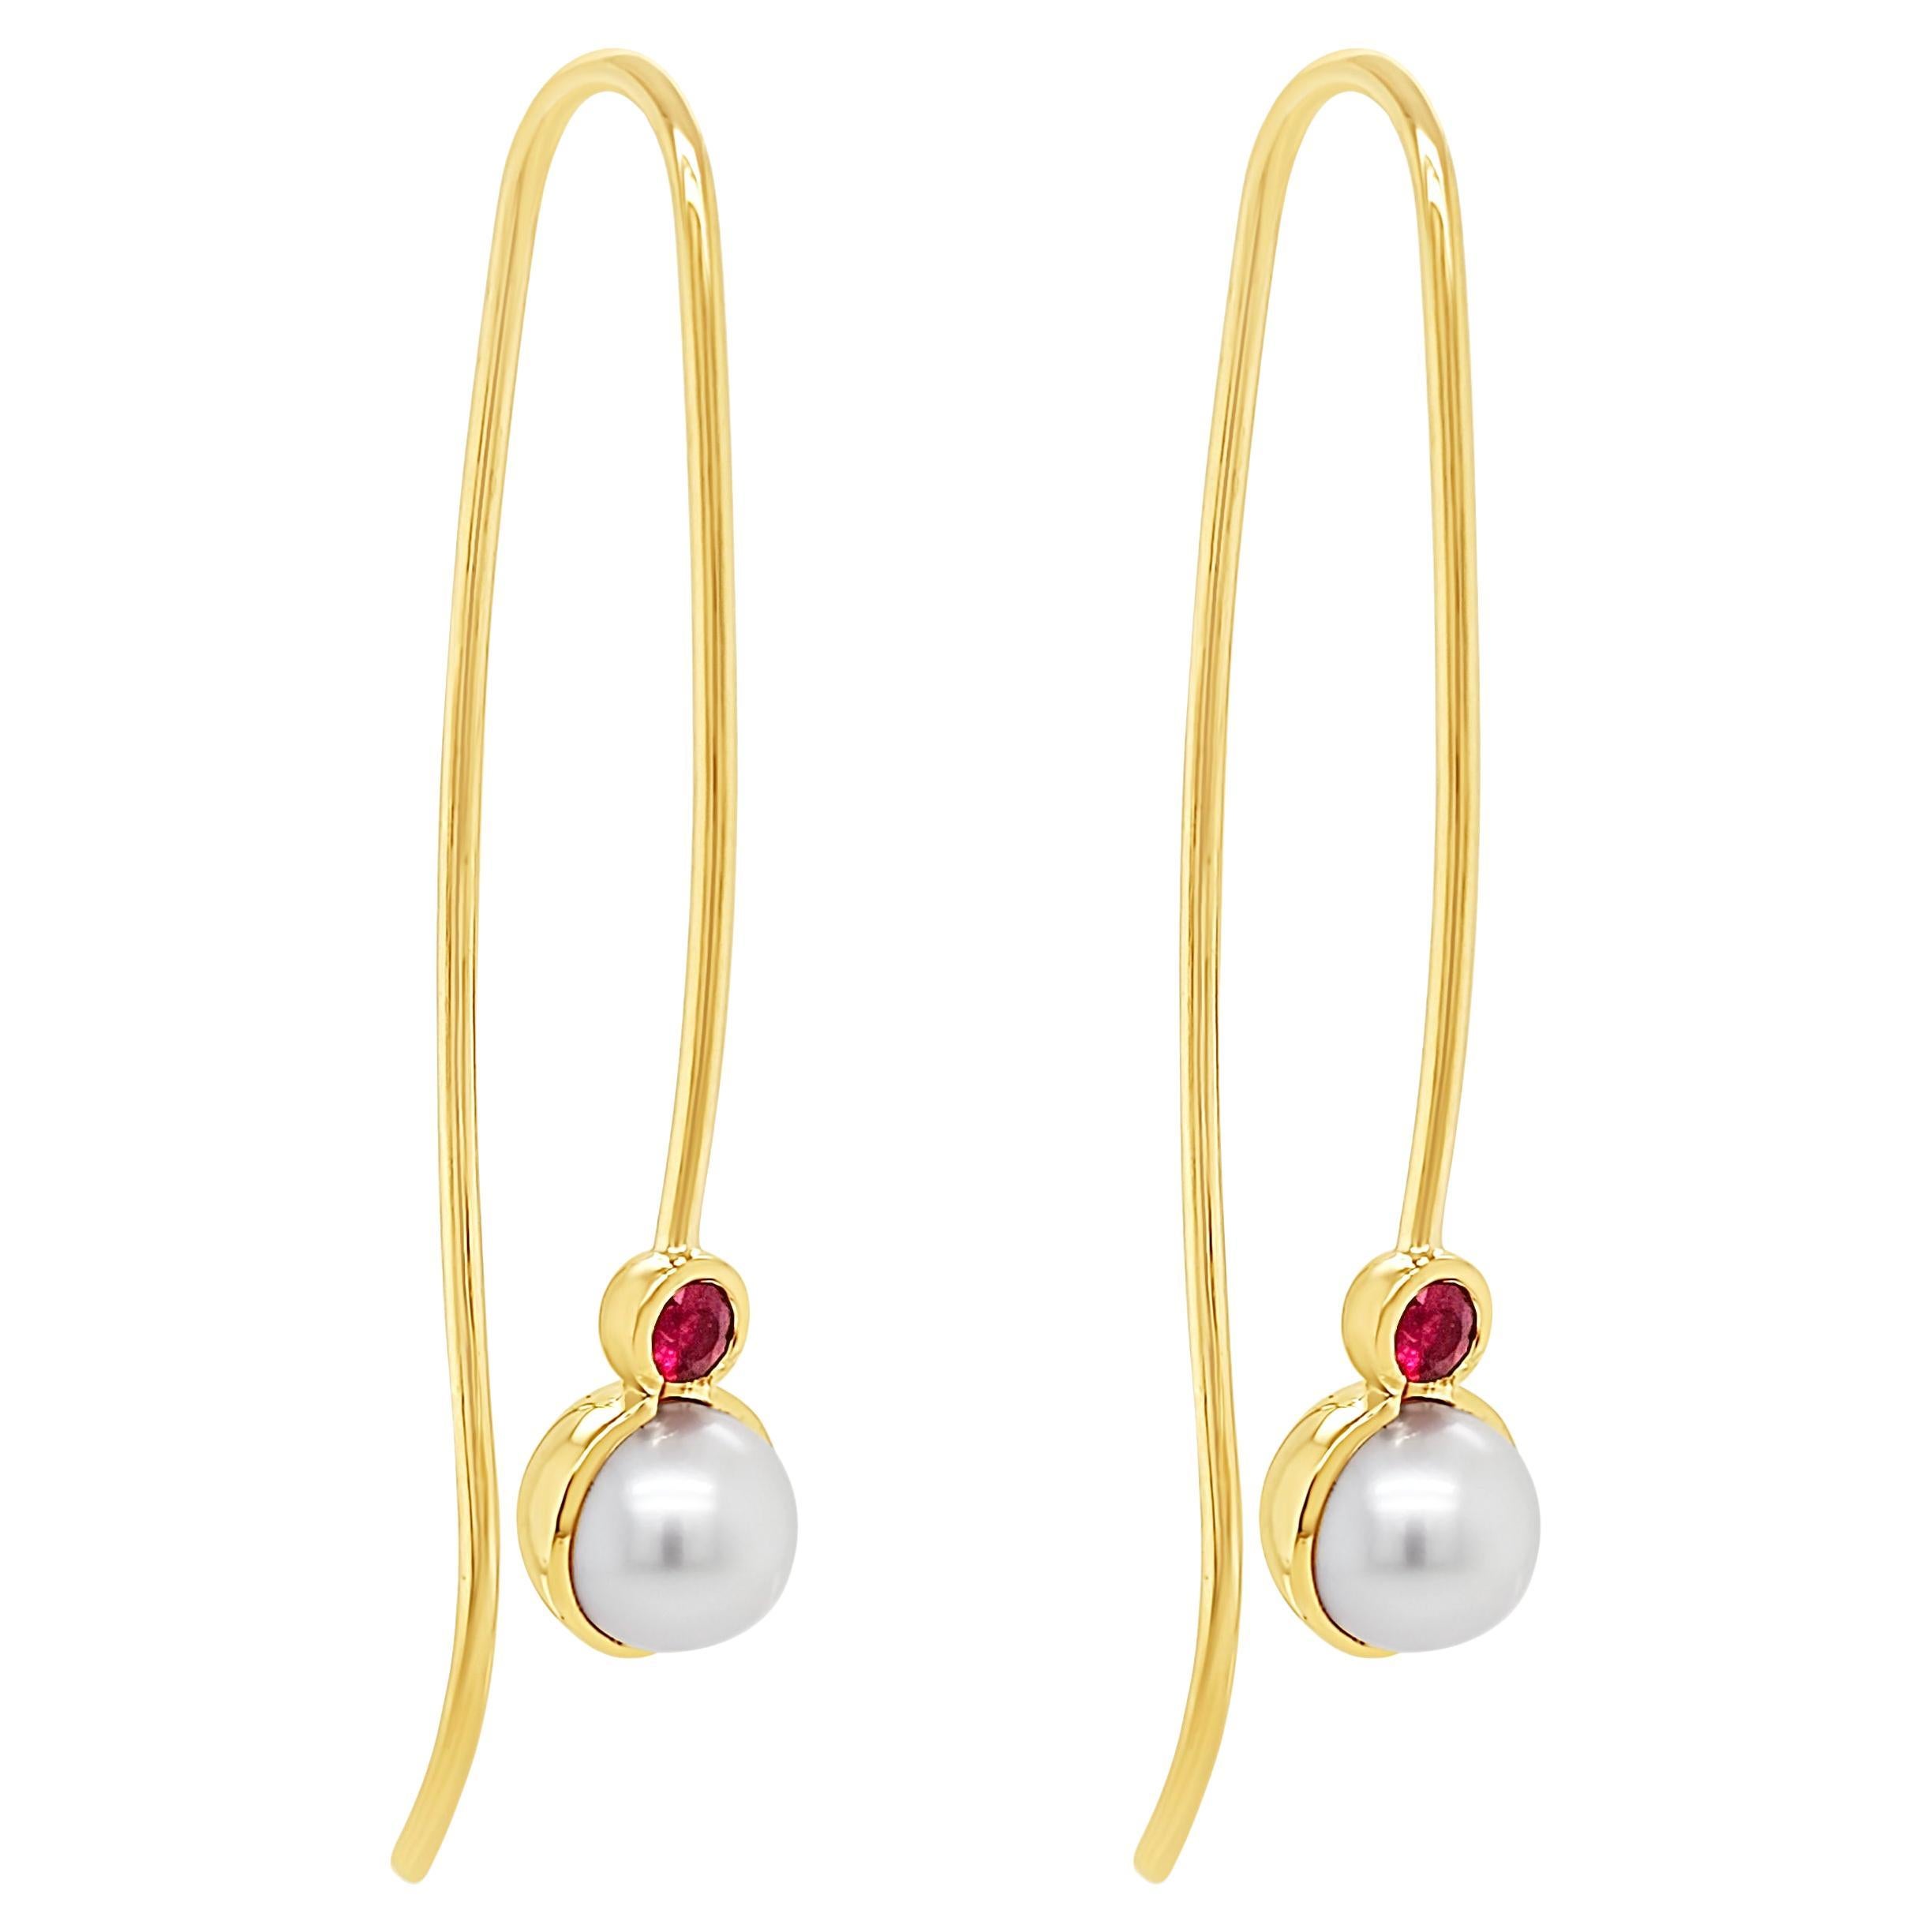 18ct Yellow Gold & Pearl Earrings Featuring Rubies "Estelle" For Sale